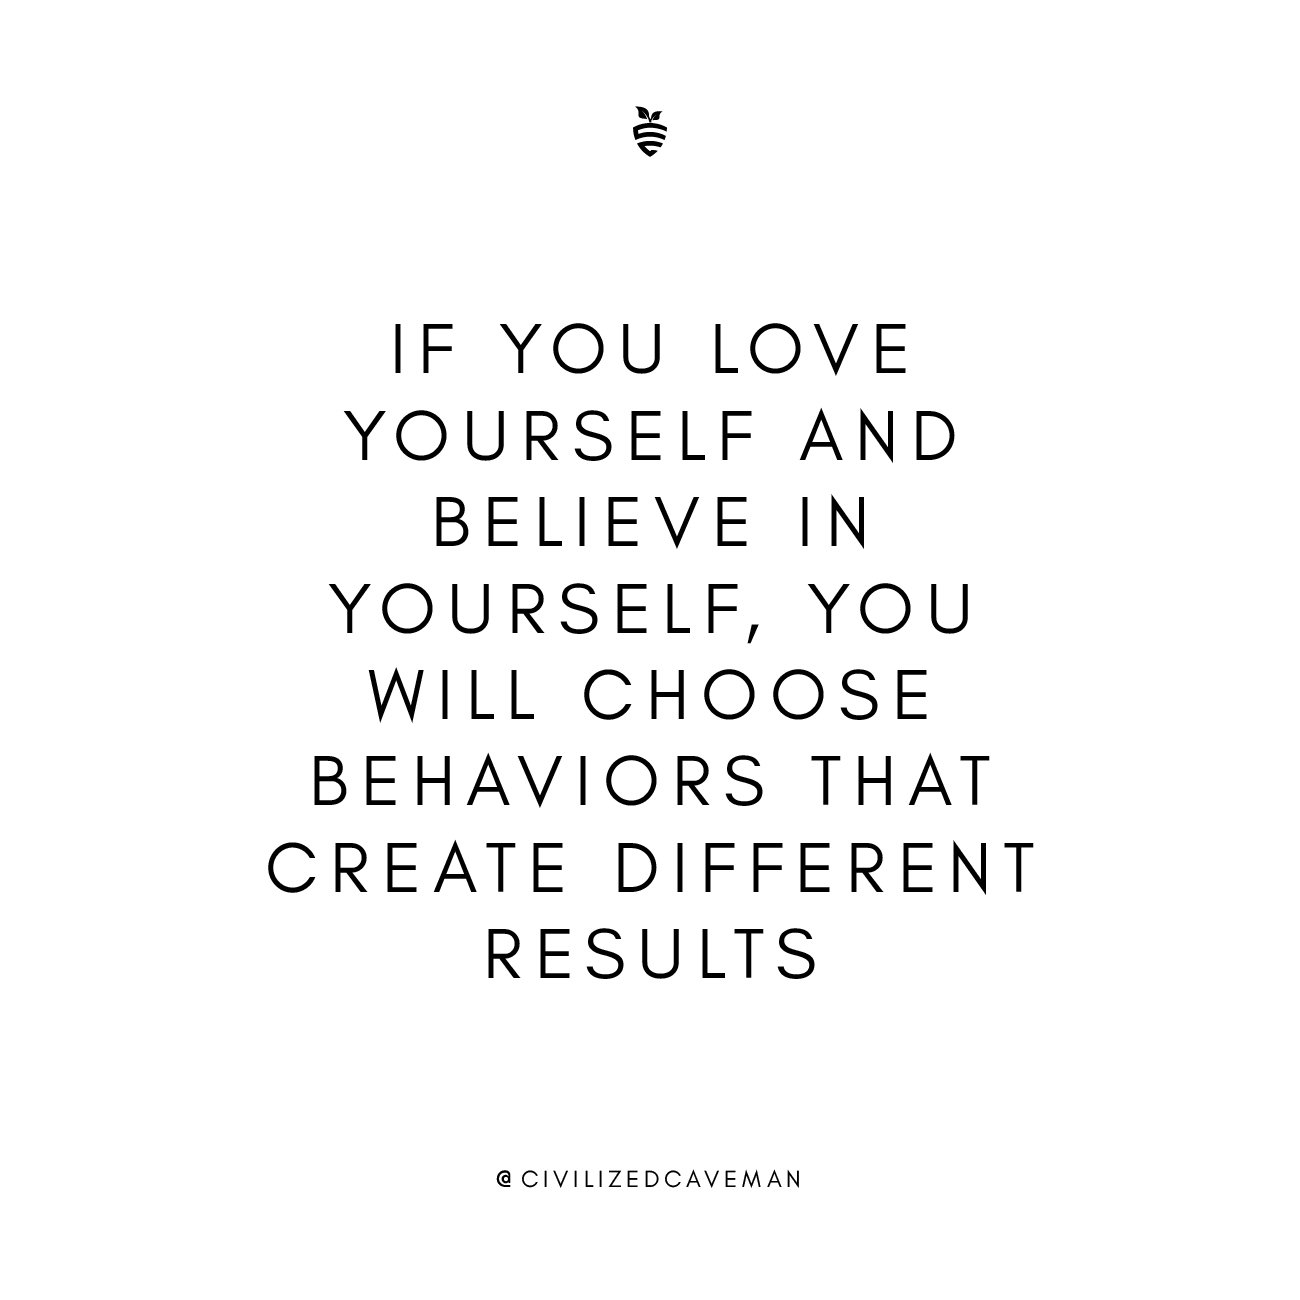 If you love yourself